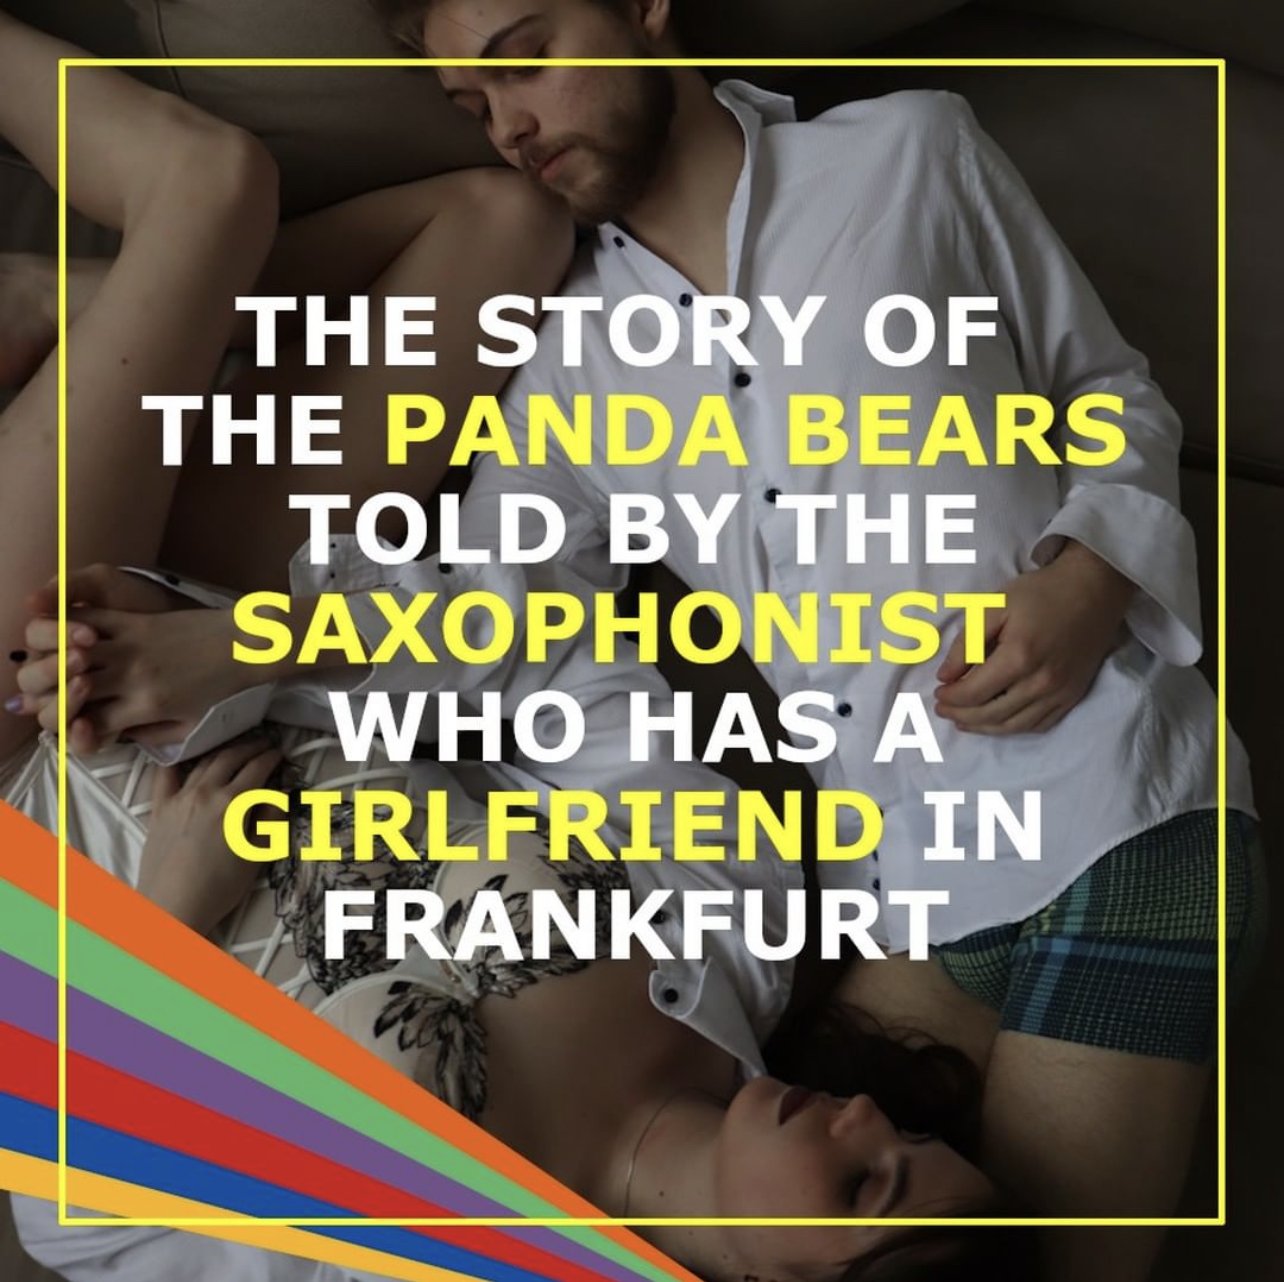 The Story of the Panda Bears Told by a Saxophonist Who Has a Girlfriend in Frankfurt